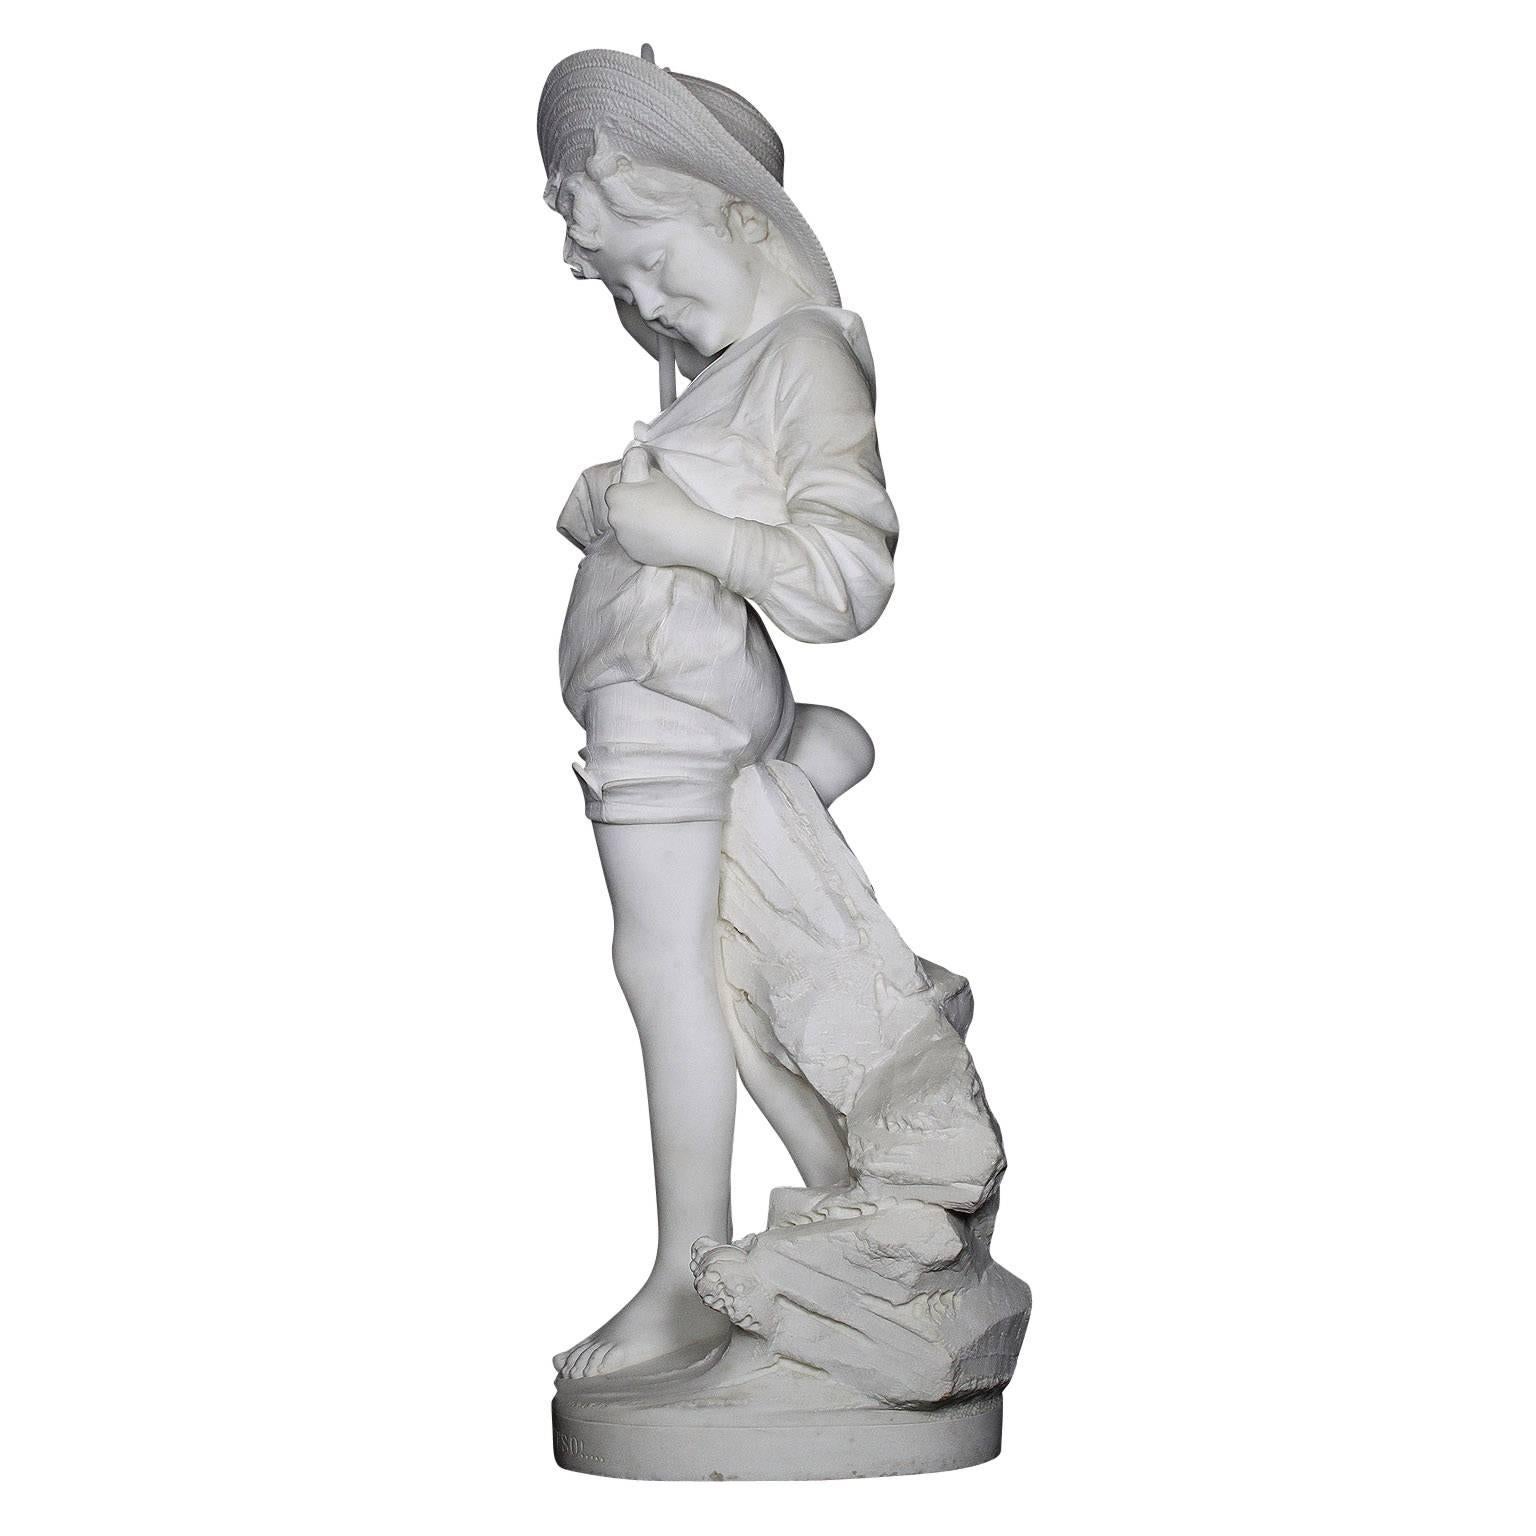 Large Italian 19th Century Carved Carrara Marble Figure of a Fisherman Boy For Sale 4